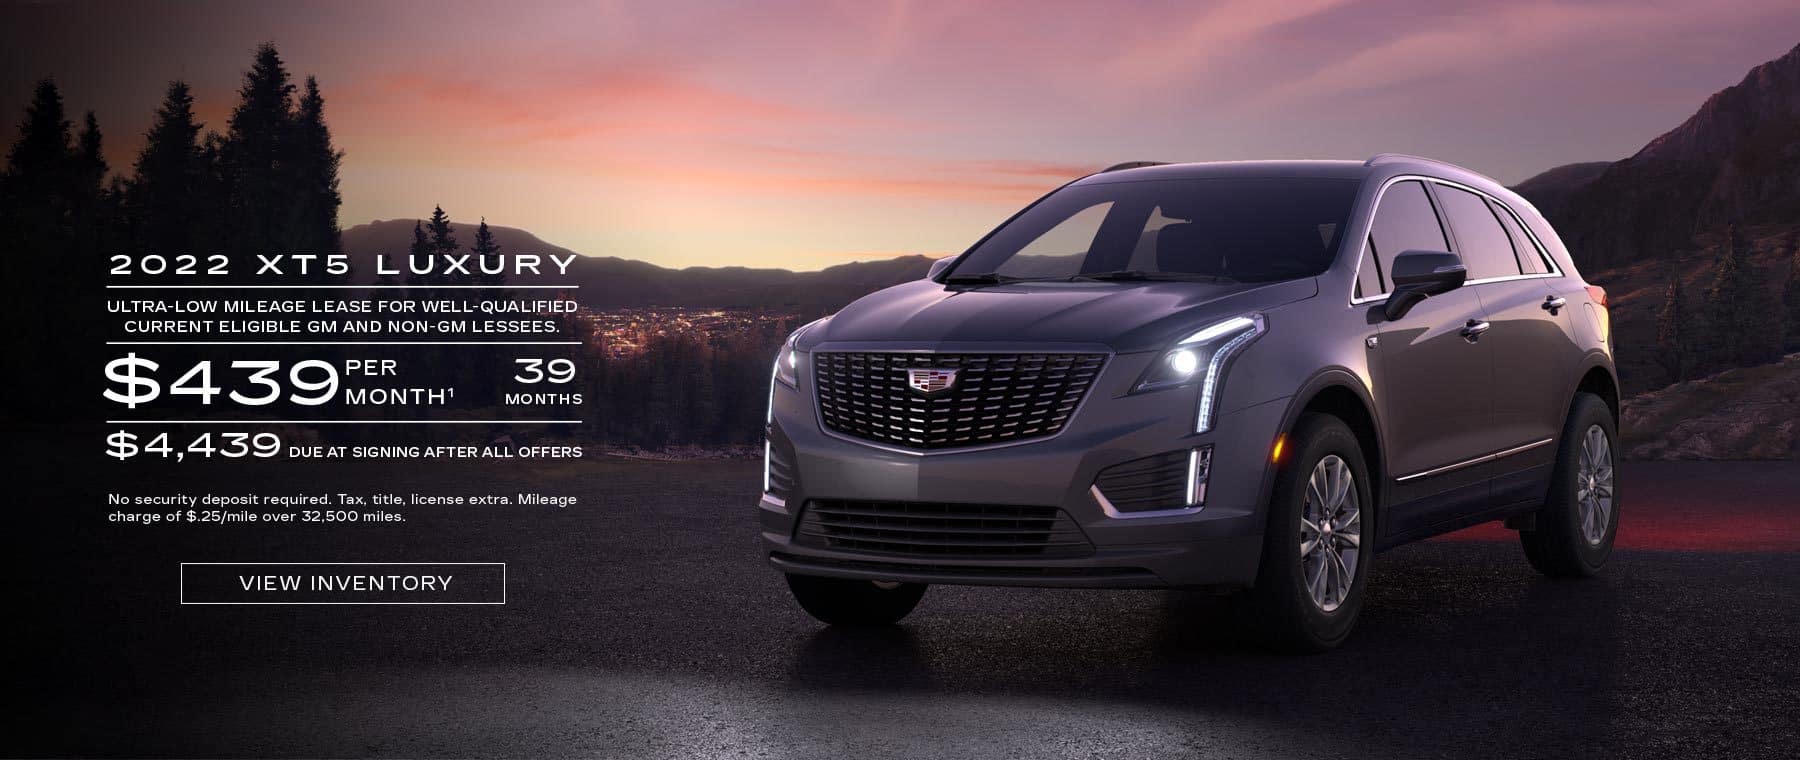 2022 XT5 Luxury. Ultra-low mileage lease for well-qualified current eligible GM and non-GM lessees. $439 per month. 39 months. $4,439 due at signing after all offers.